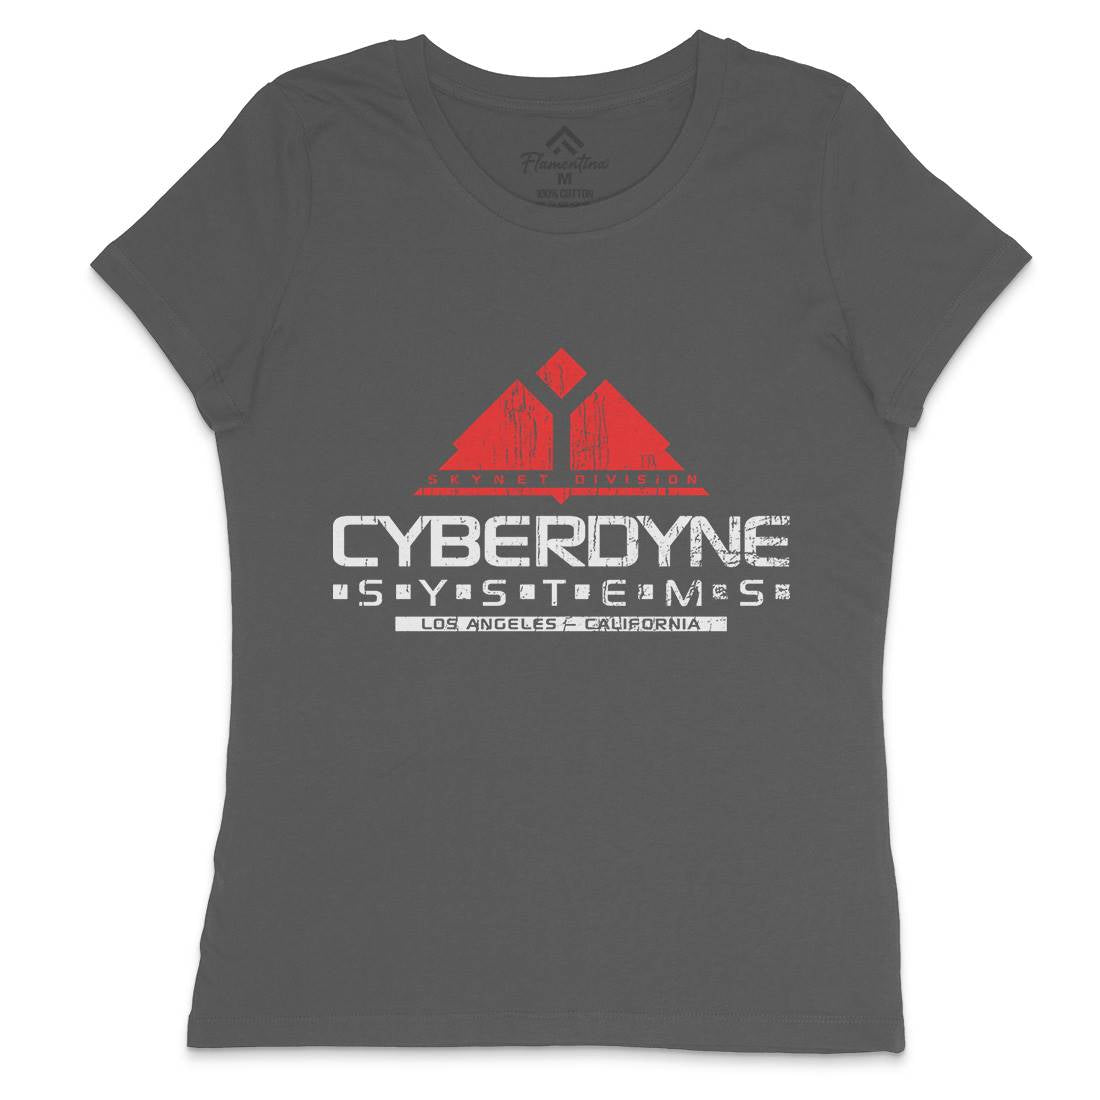 Cyberdyne Systems Womens Crew Neck T-Shirt Space D122